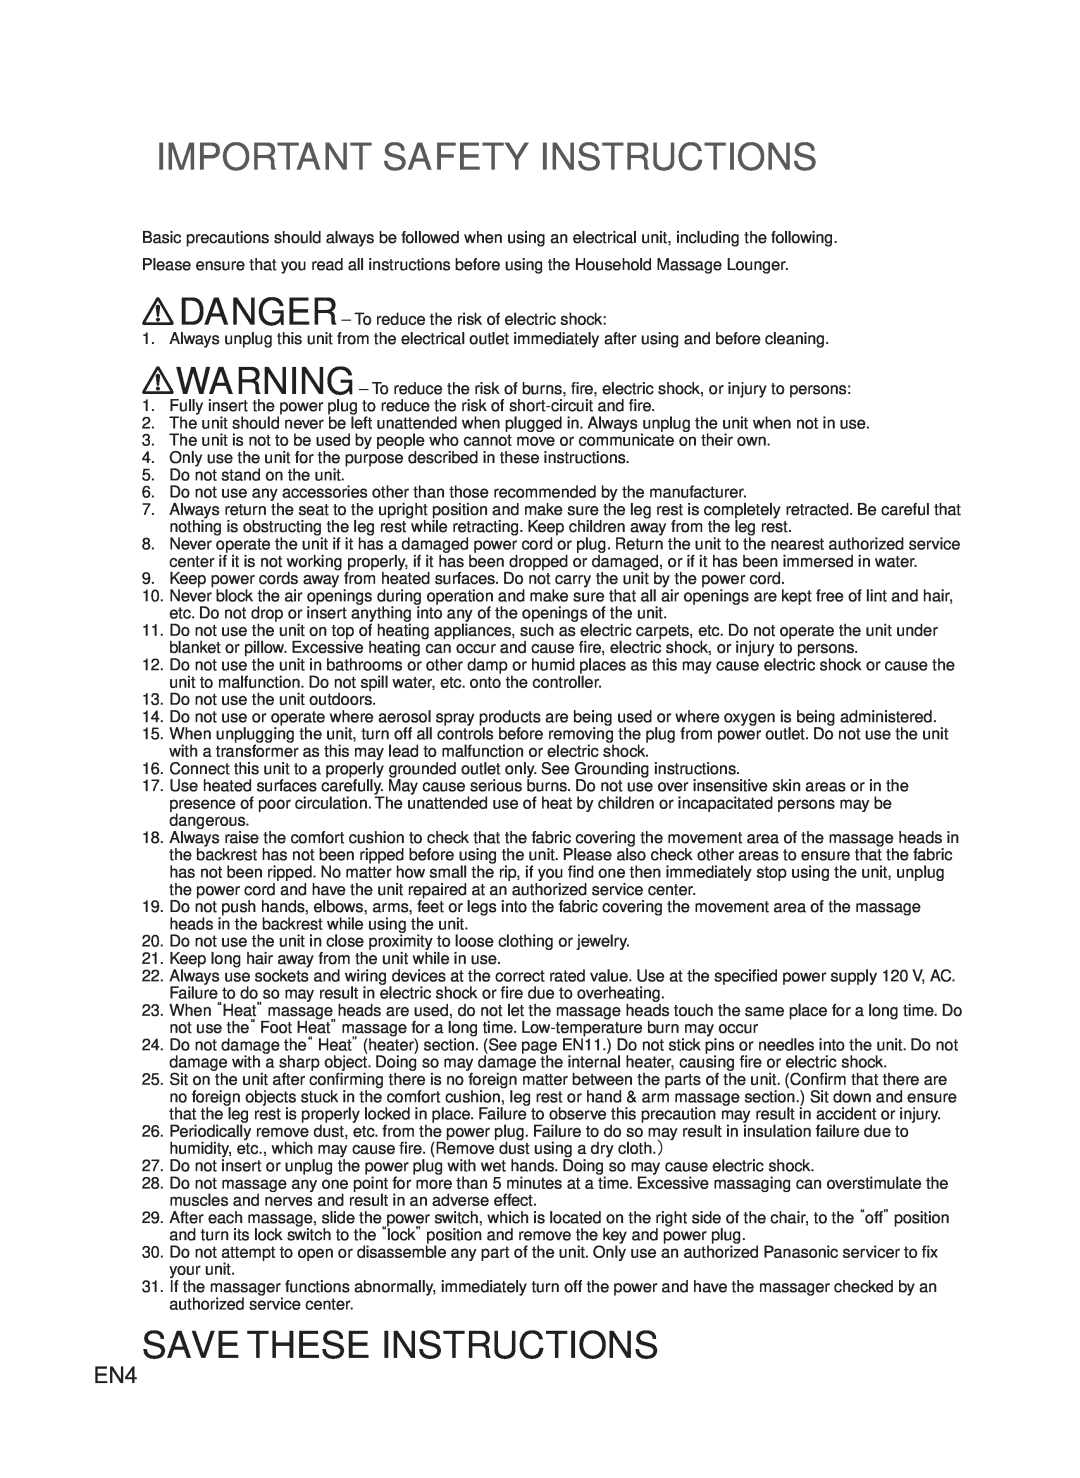 Panasonic EP-MA73 manual Important Safety Instructions, Save These Instructions 